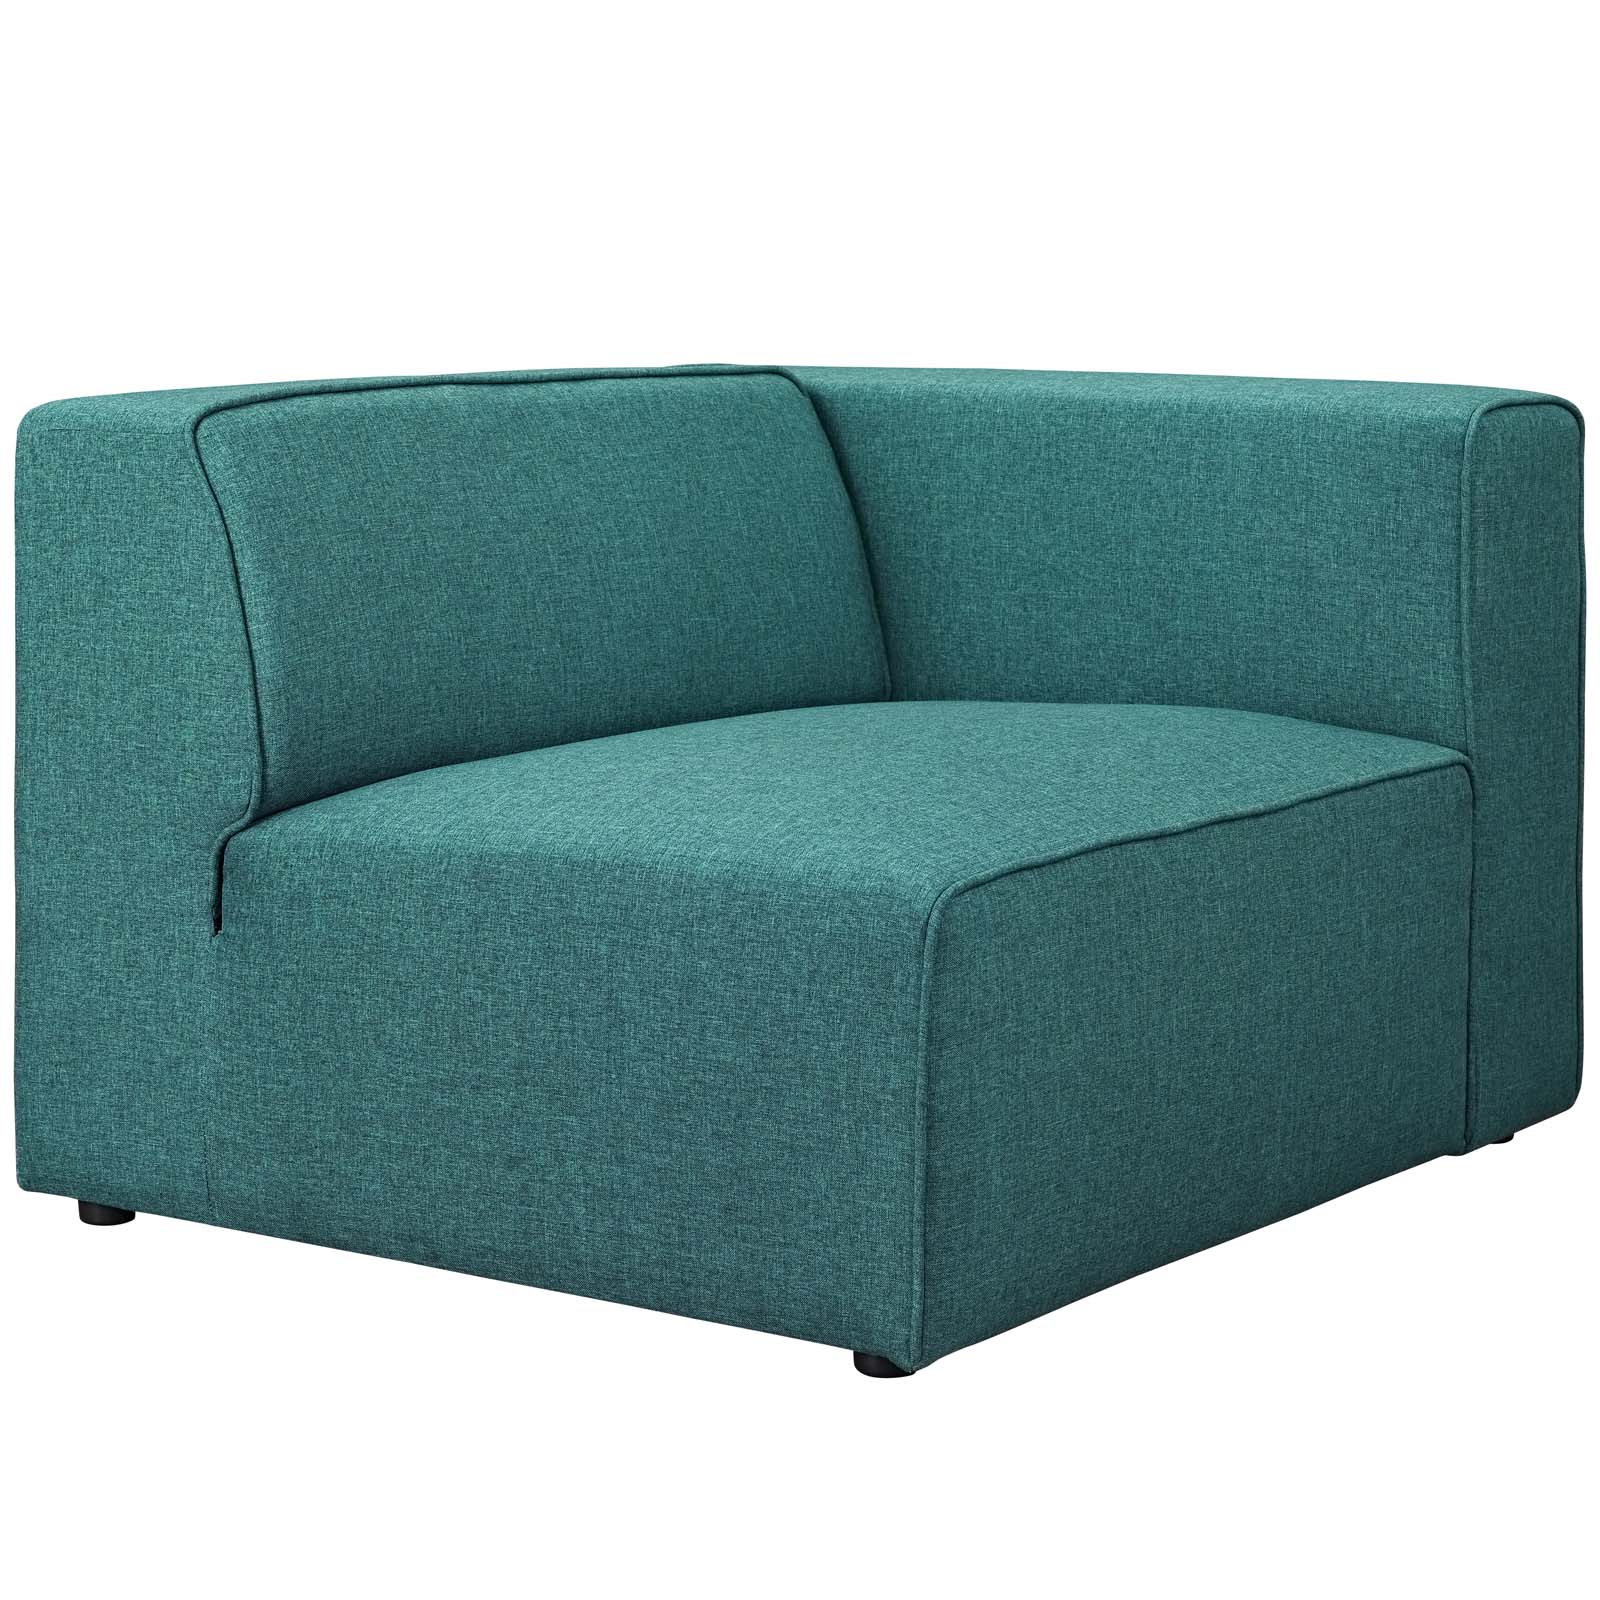 Modway Accent Chairs - Mingle Fabric Right-Facing Sofa Teal